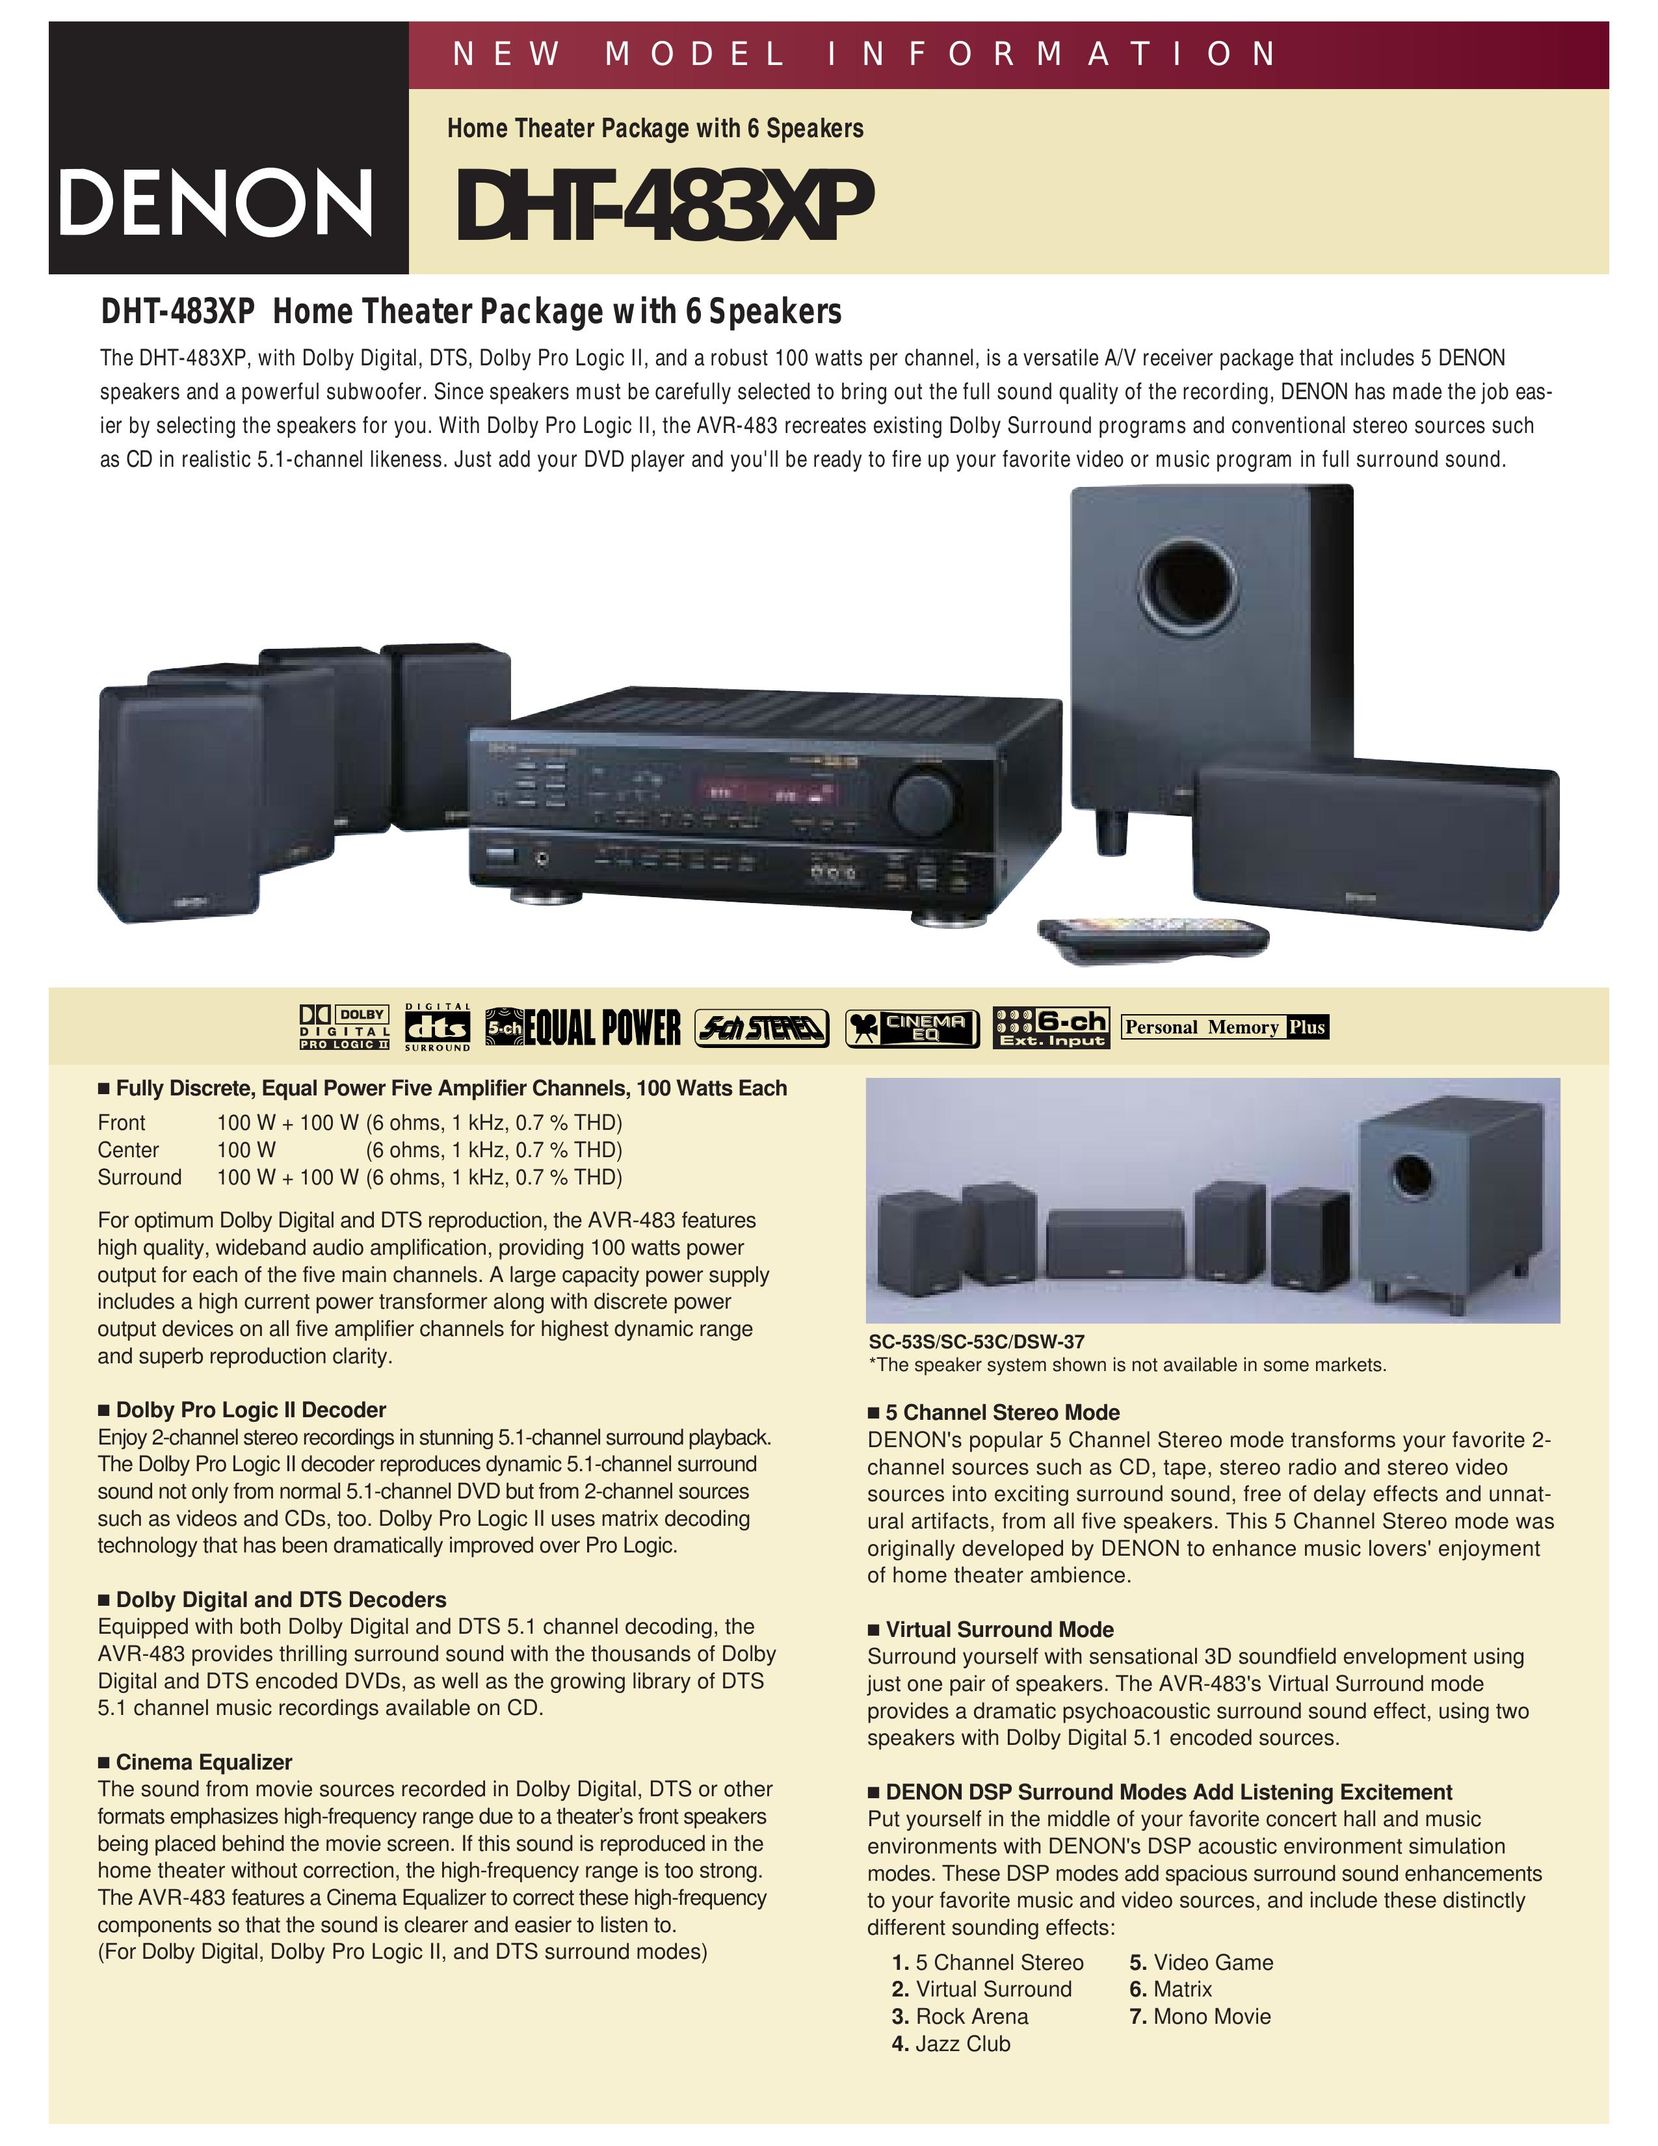 Denon DHT-483XP Home Theater System User Manual